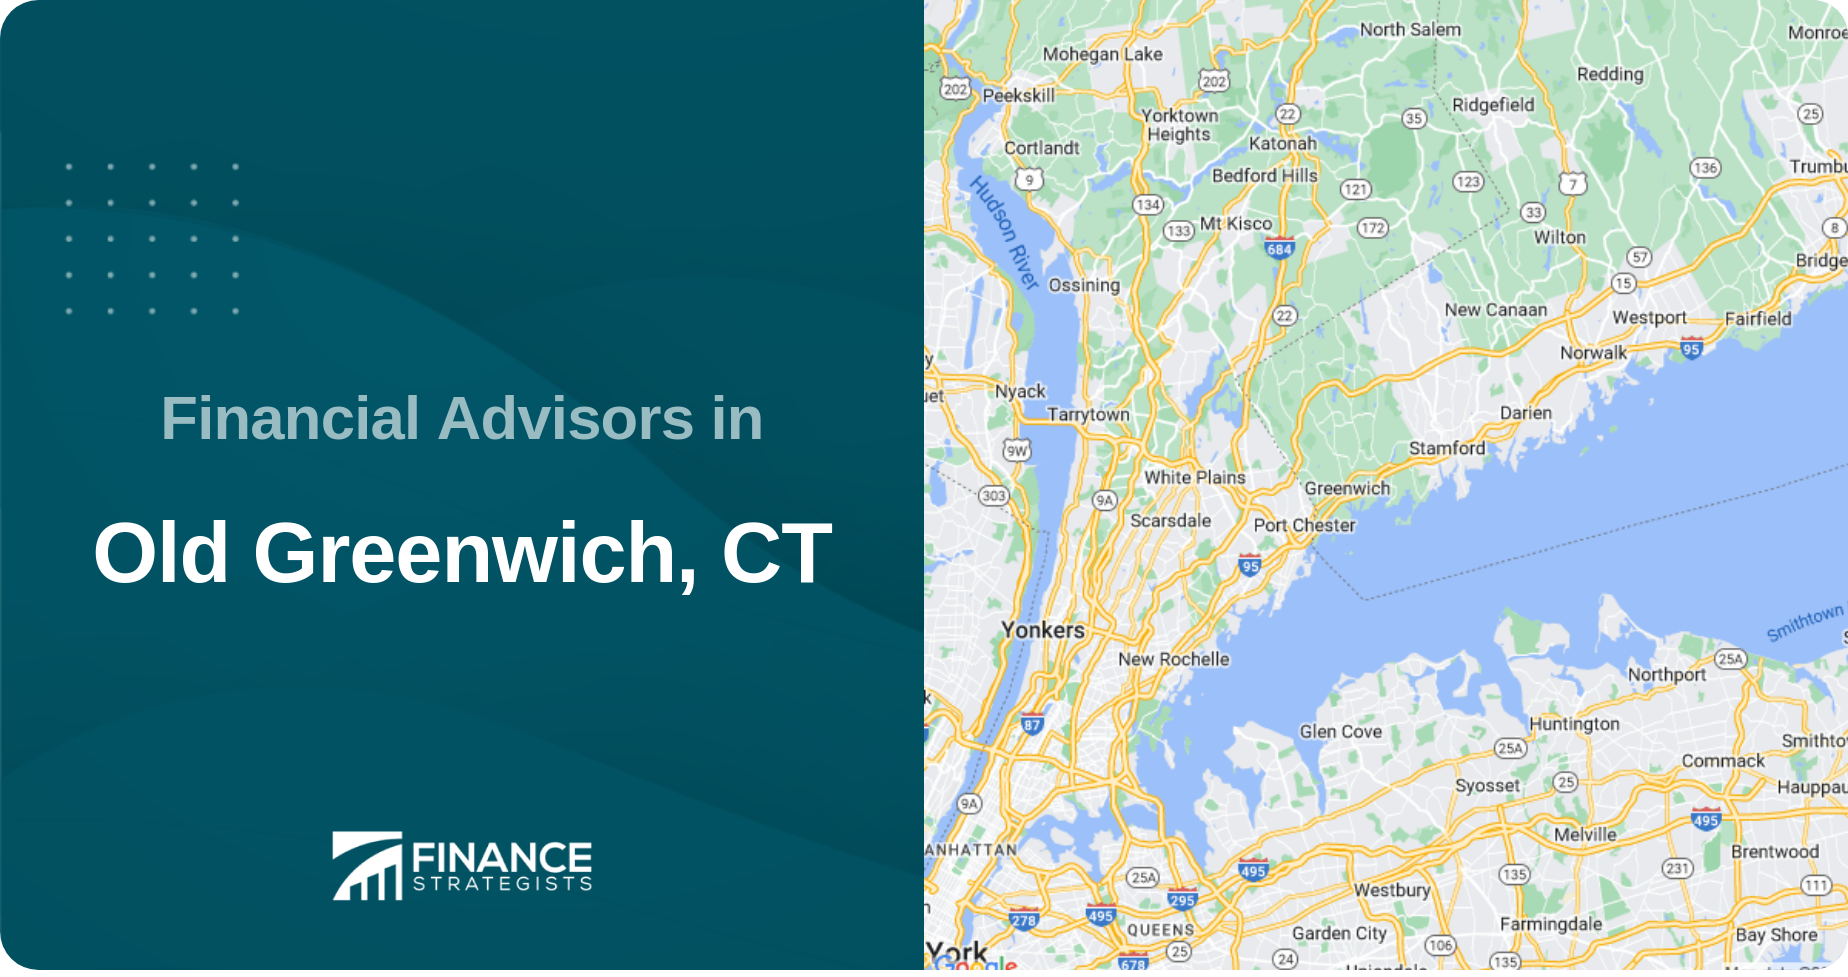 Financial Advisors in Old Greenwich, CT